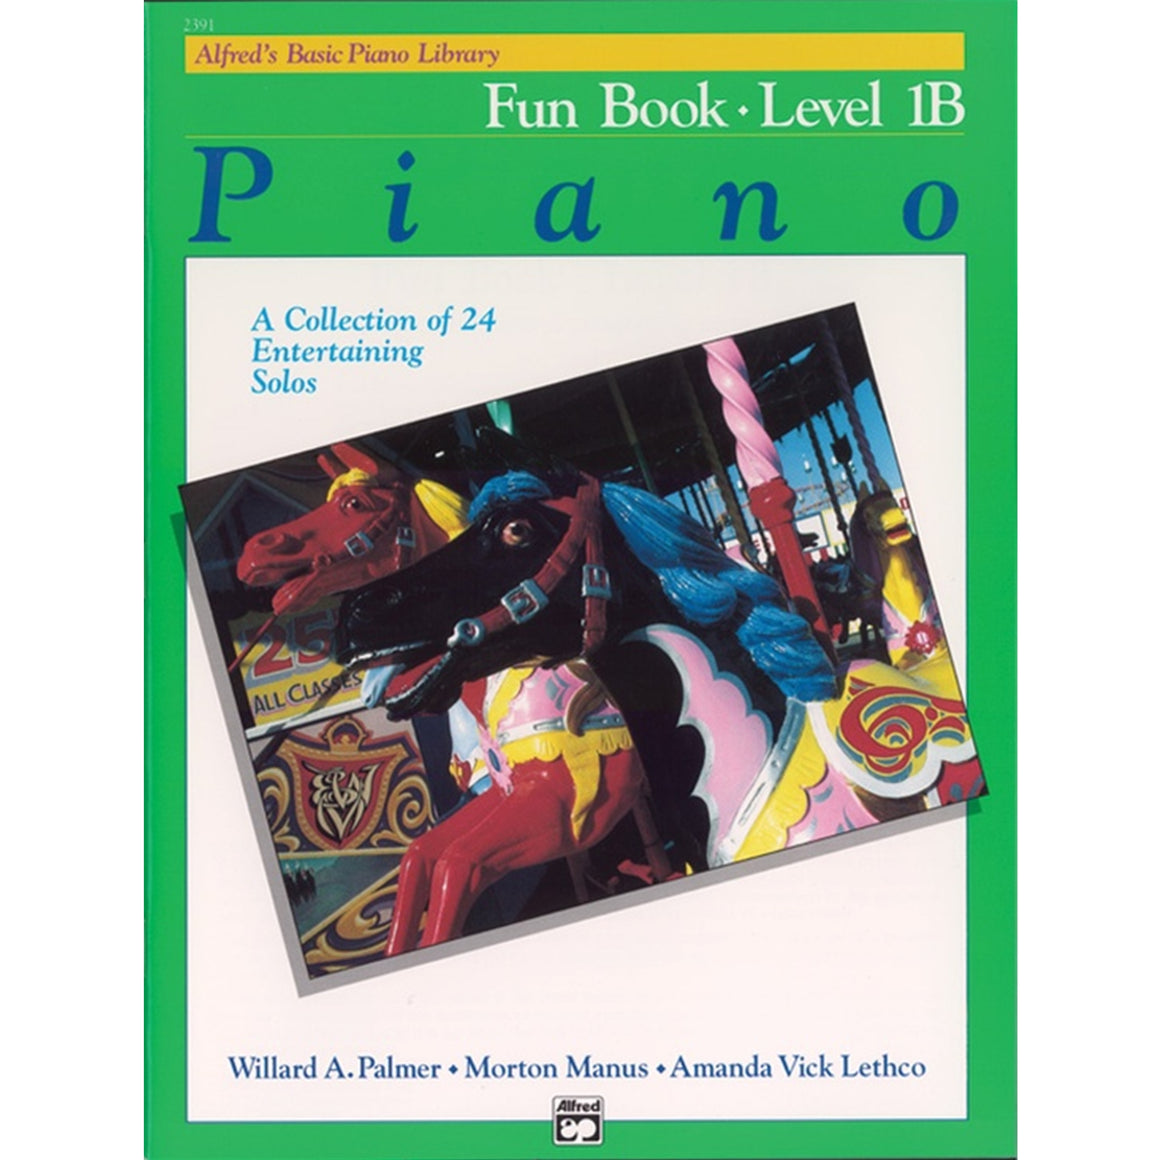 ALFRED 2391 Alfred's Basic Piano Library: Fun Book 1B